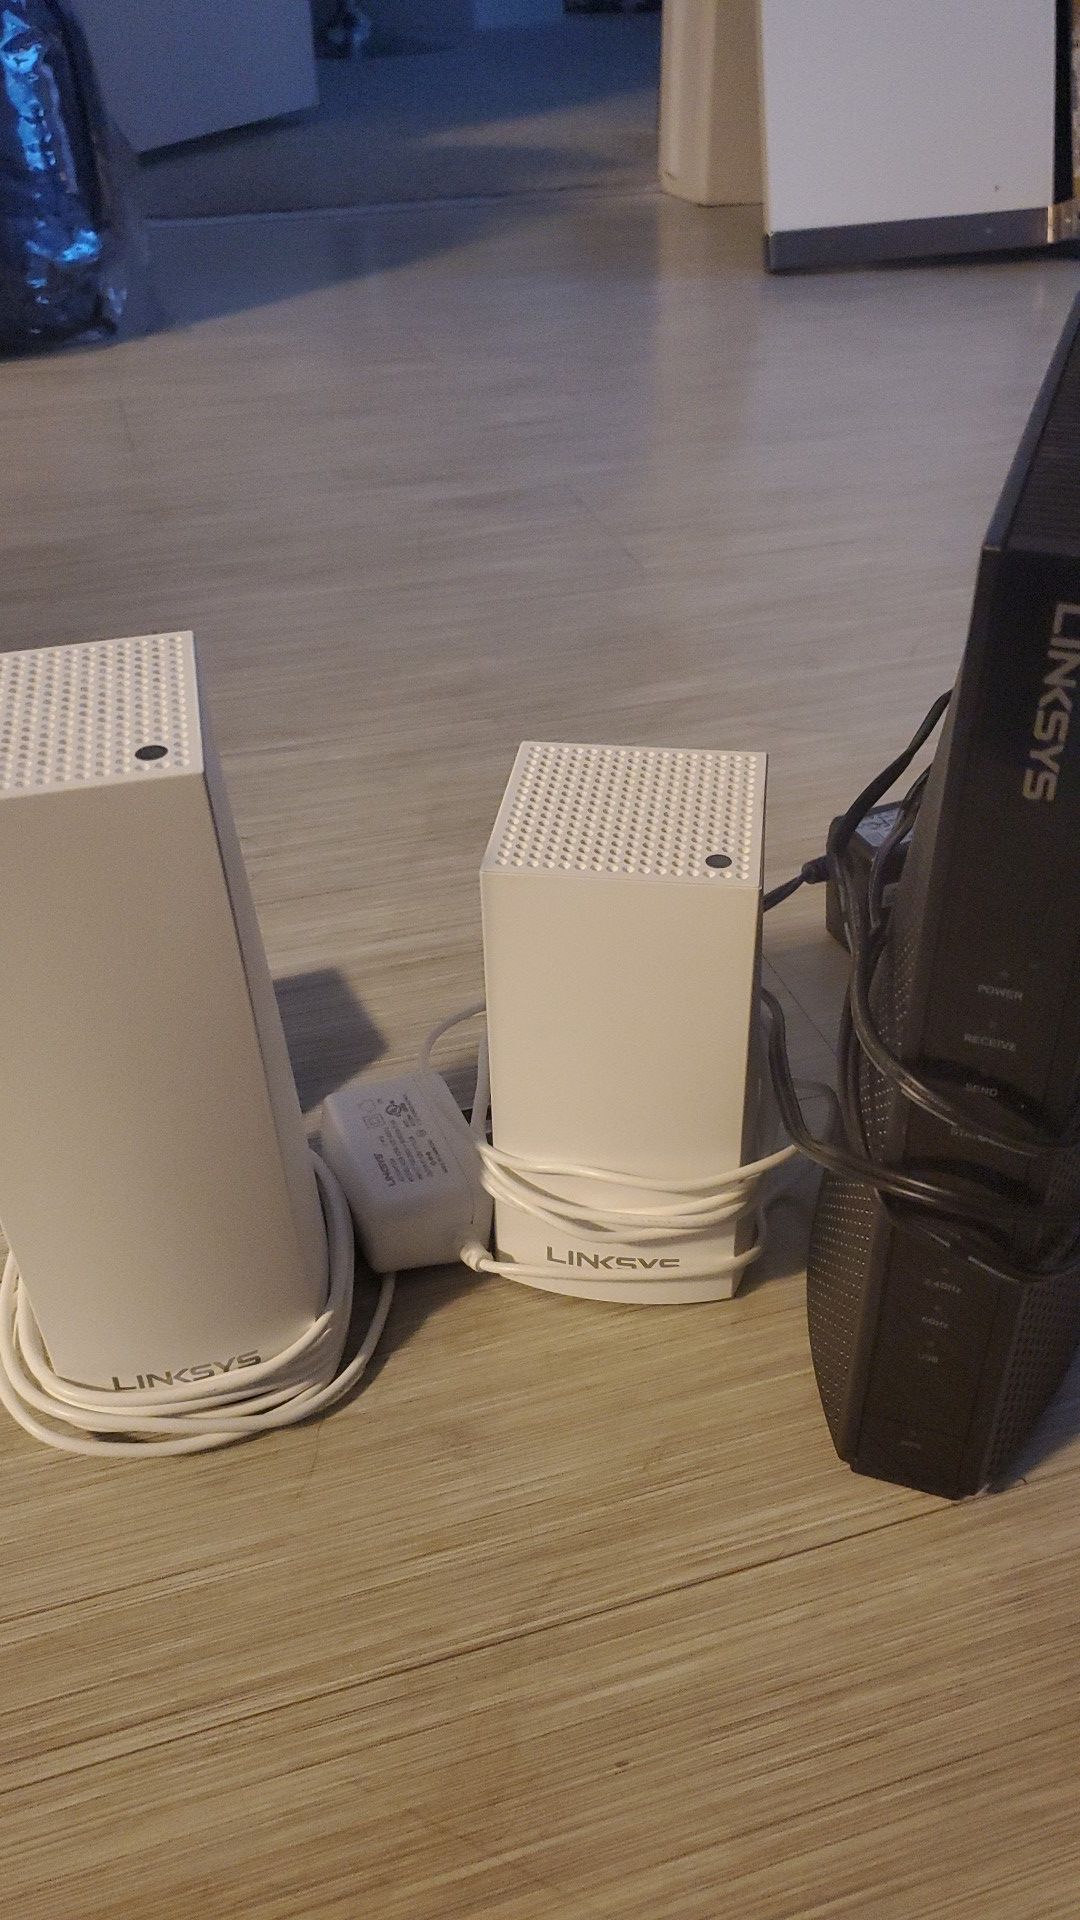 Linksys imesh velop routers + linksys cable modem